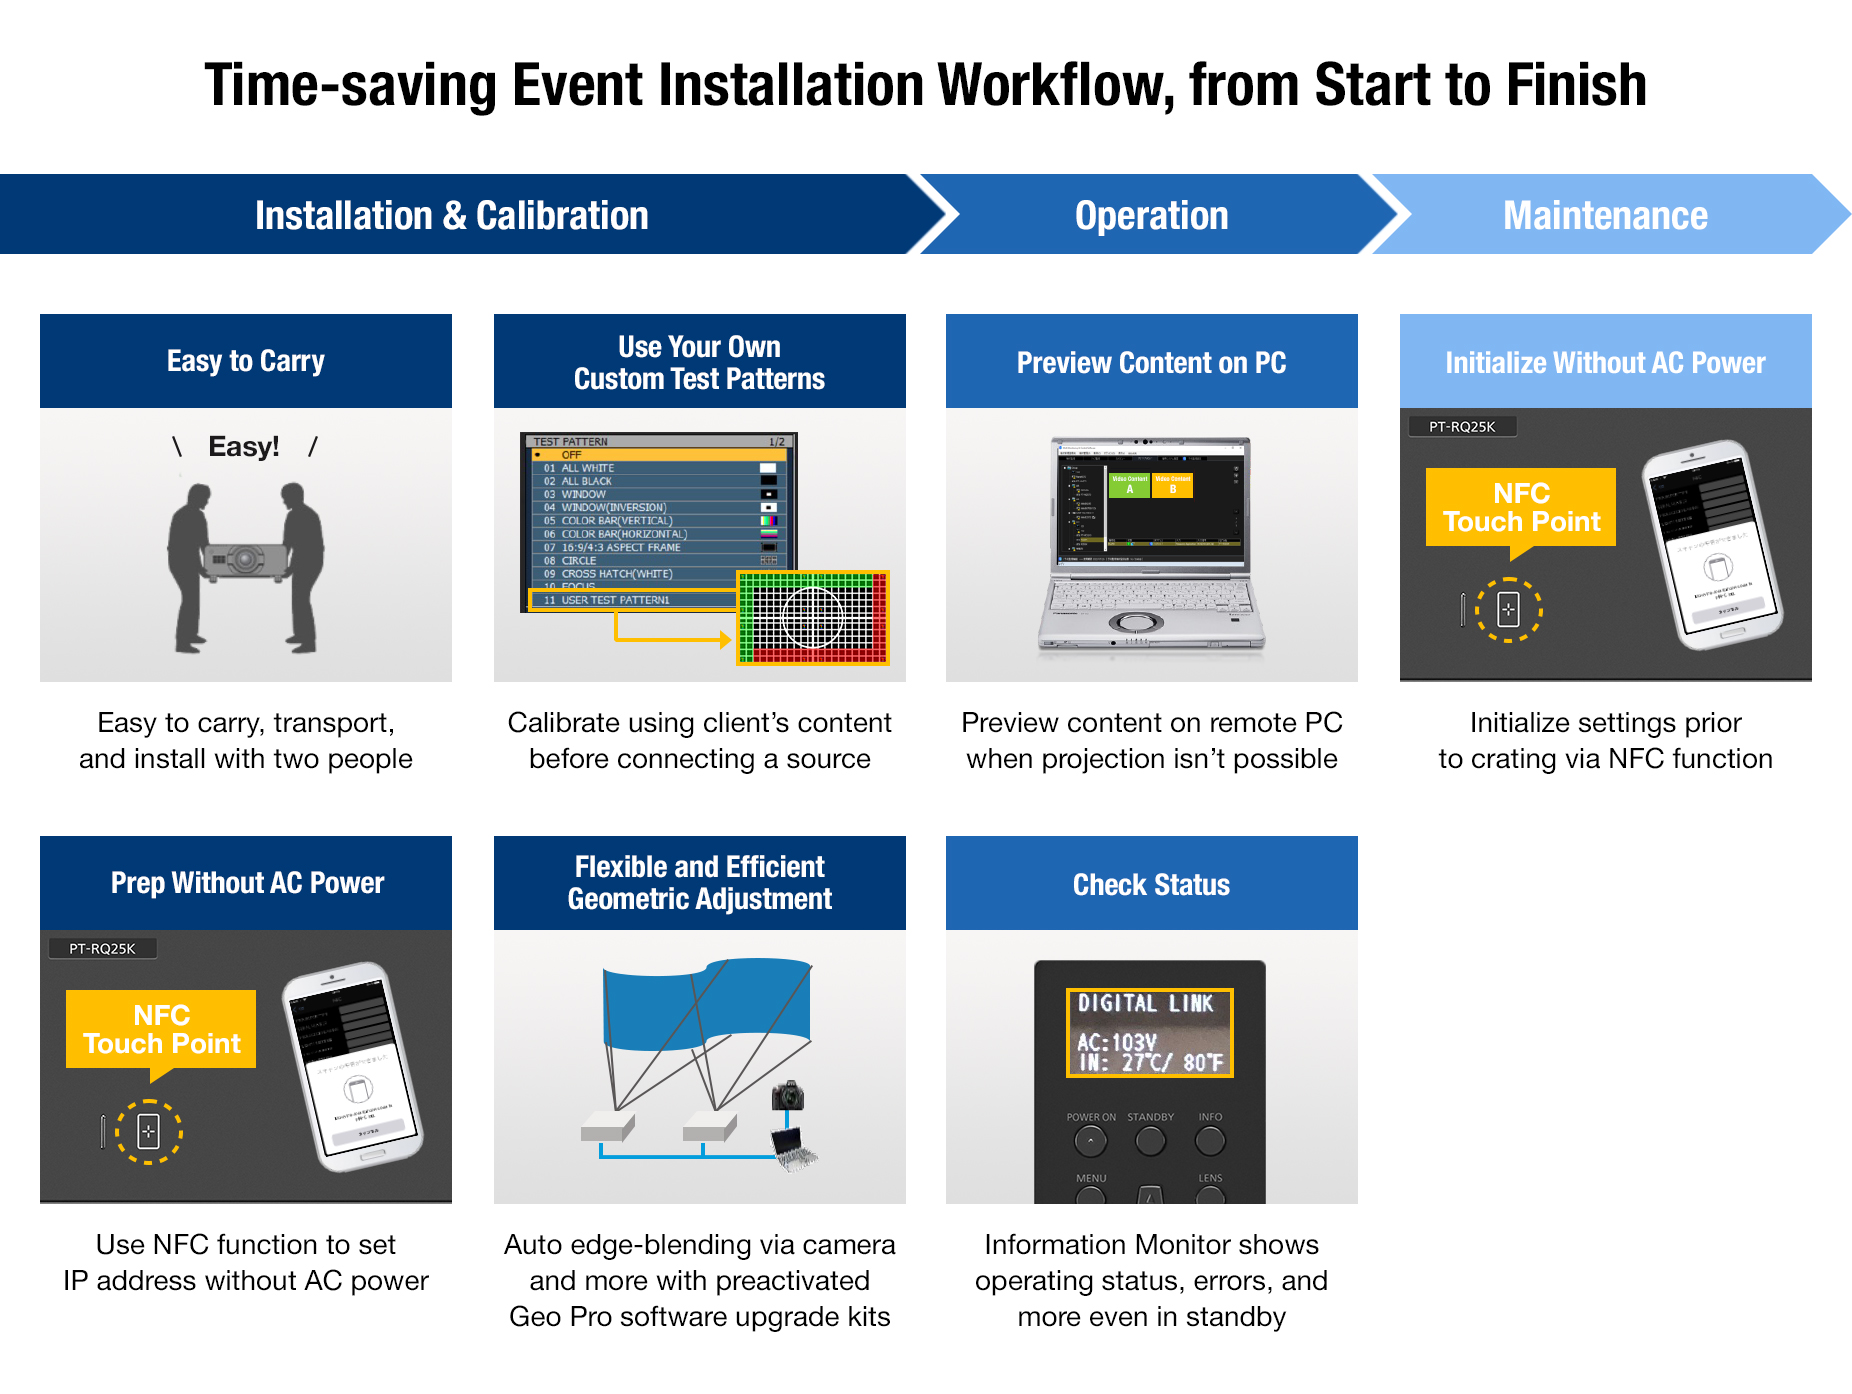 Flexible Features Streamline On-site Workflow